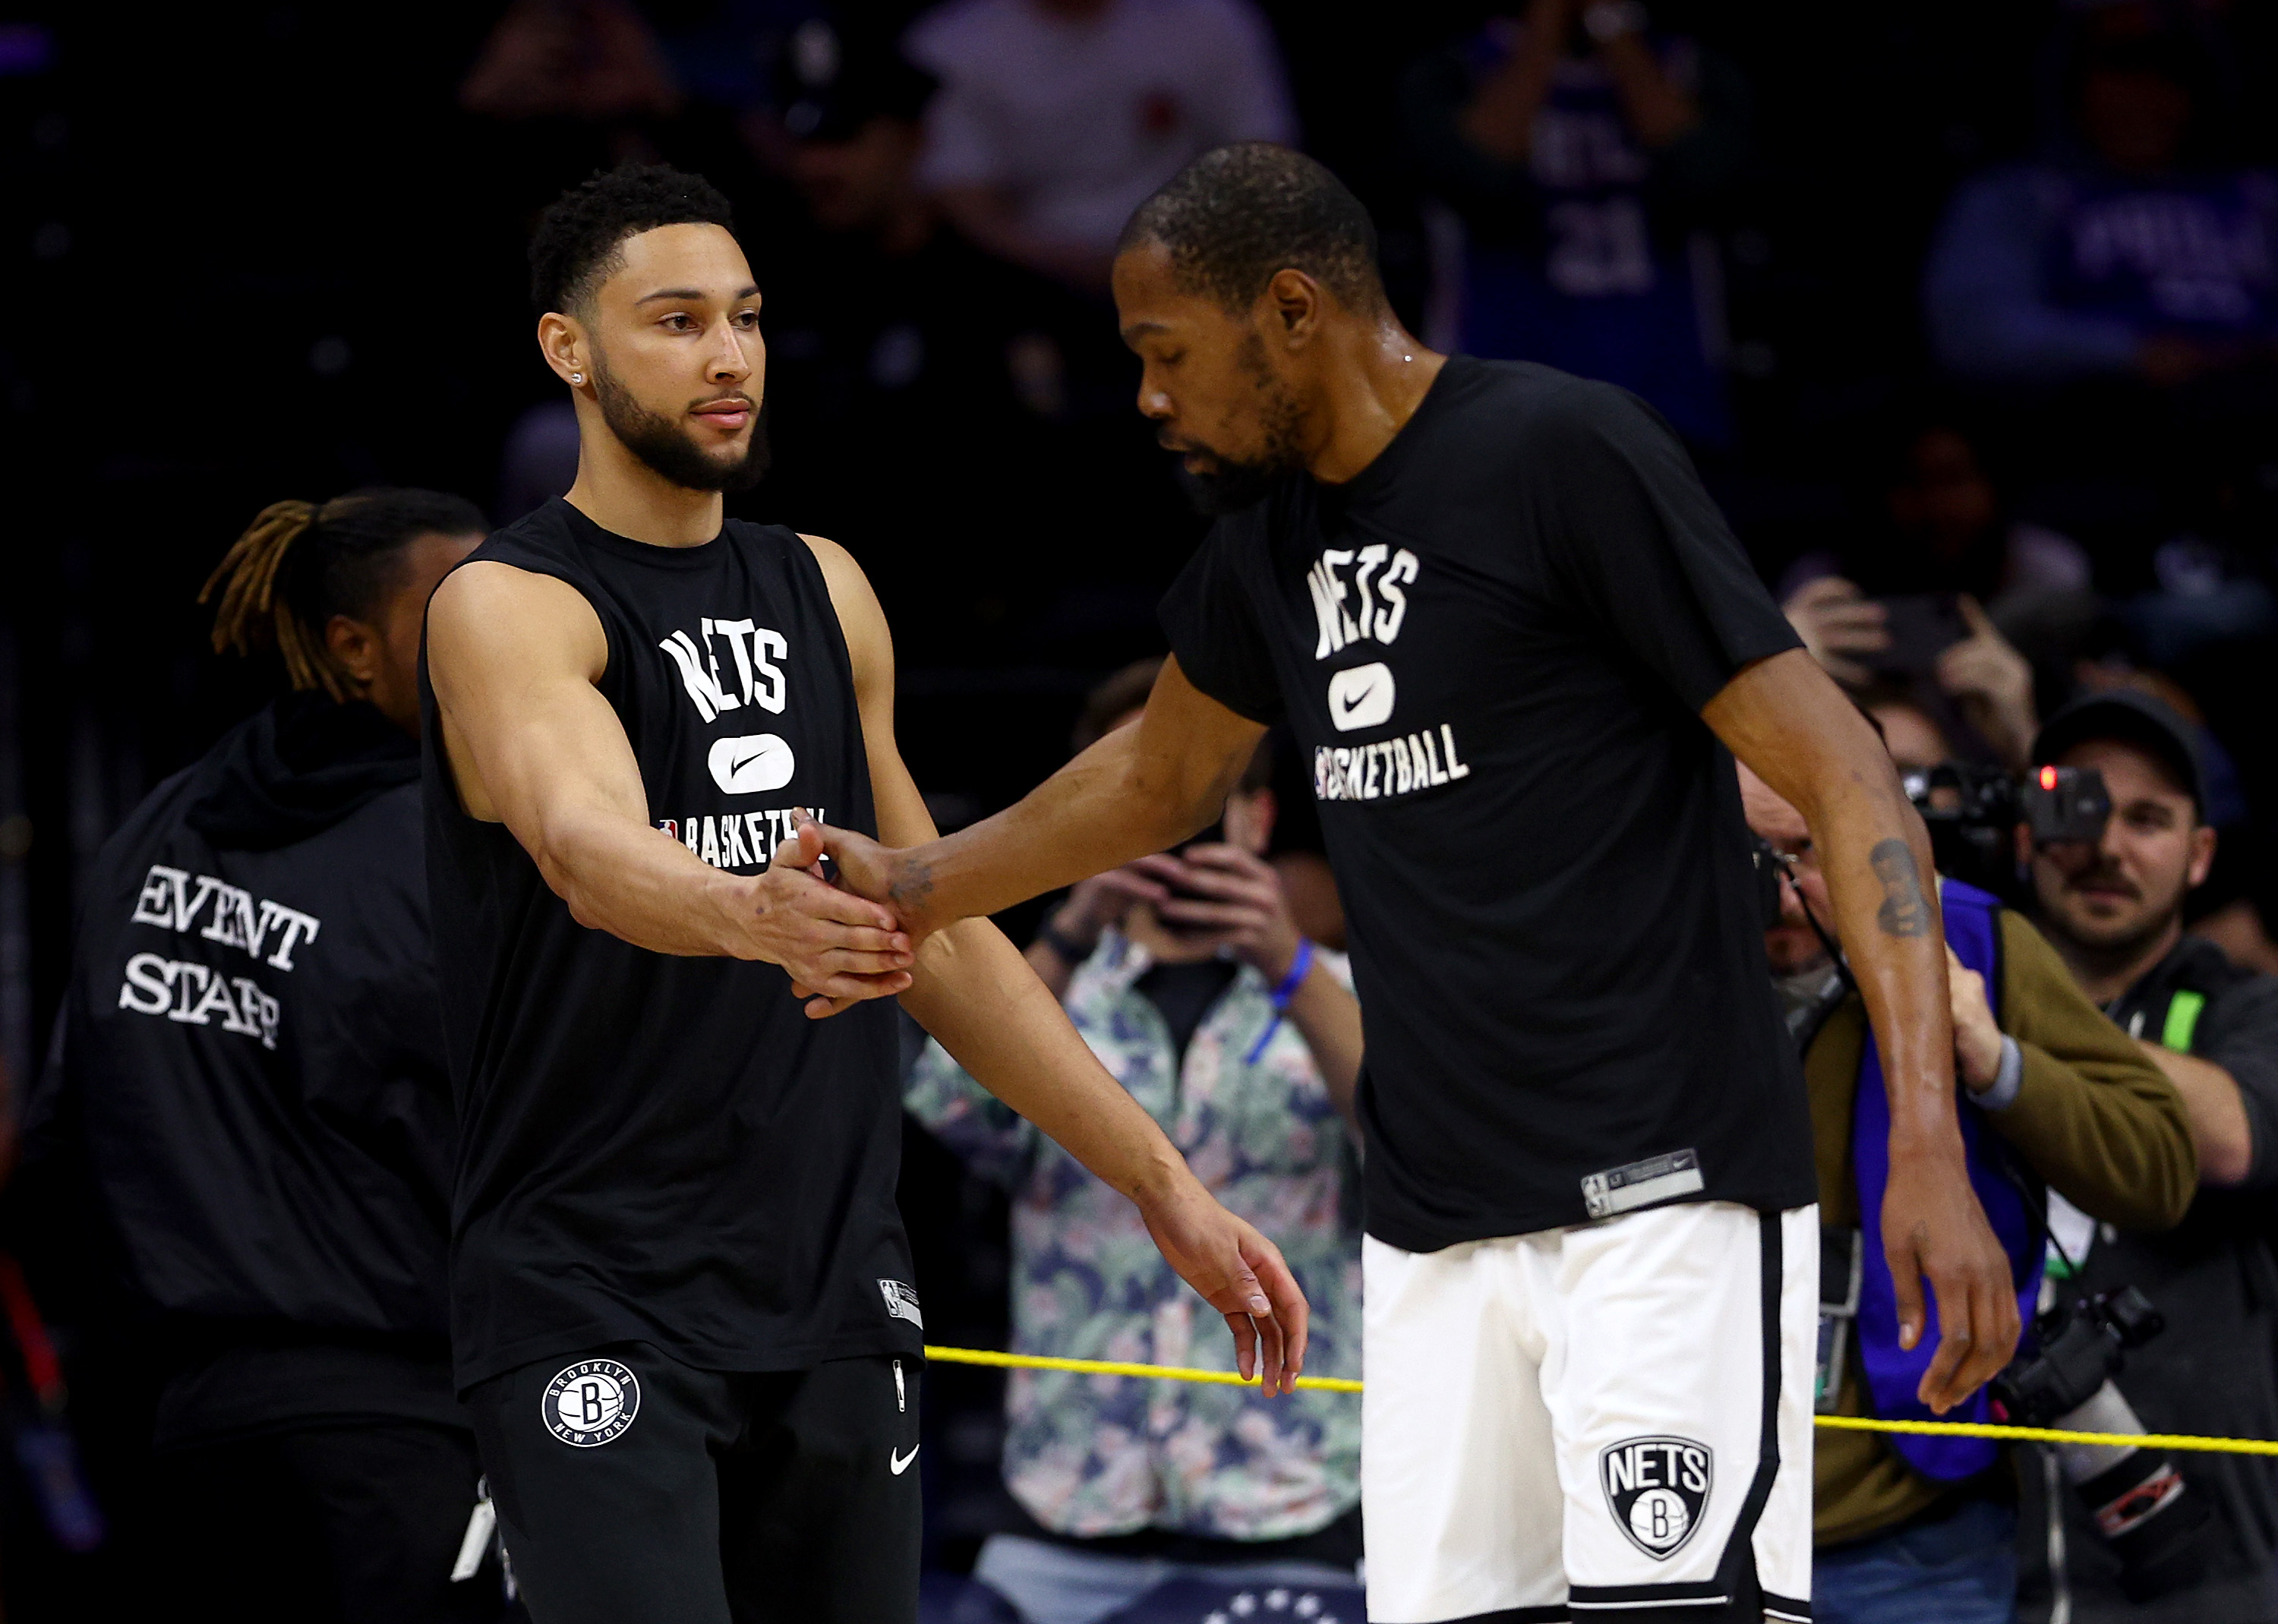 Ben Simmons and Kevin Durant of the Brooklyn Nets greet each other during warm ups before the game against the Philadelphia 76ers.